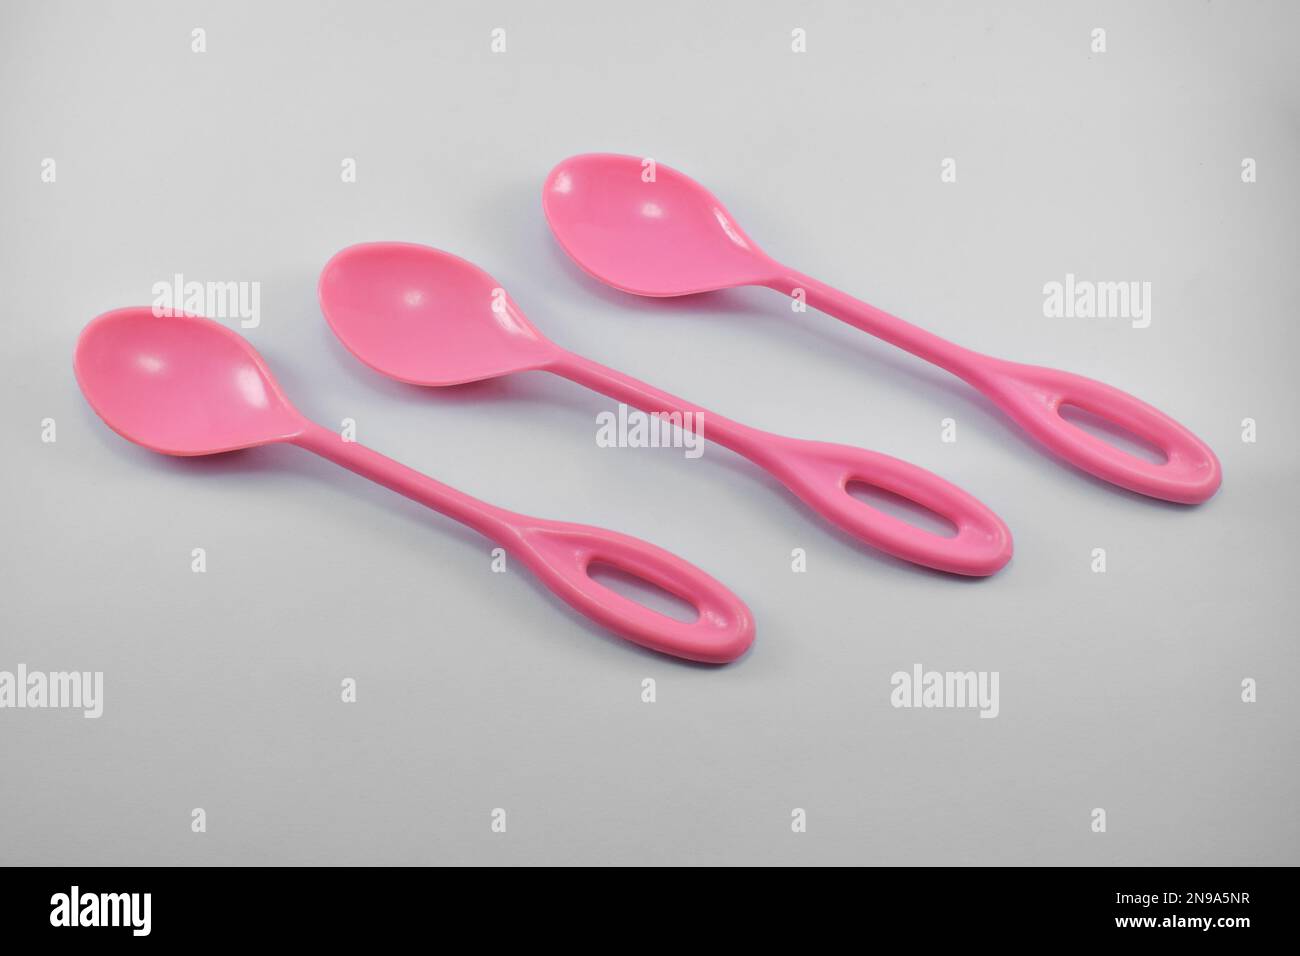 https://c8.alamy.com/comp/2N9A5NR/small-pink-plastic-spoon-isolated-on-white-background-2N9A5NR.jpg